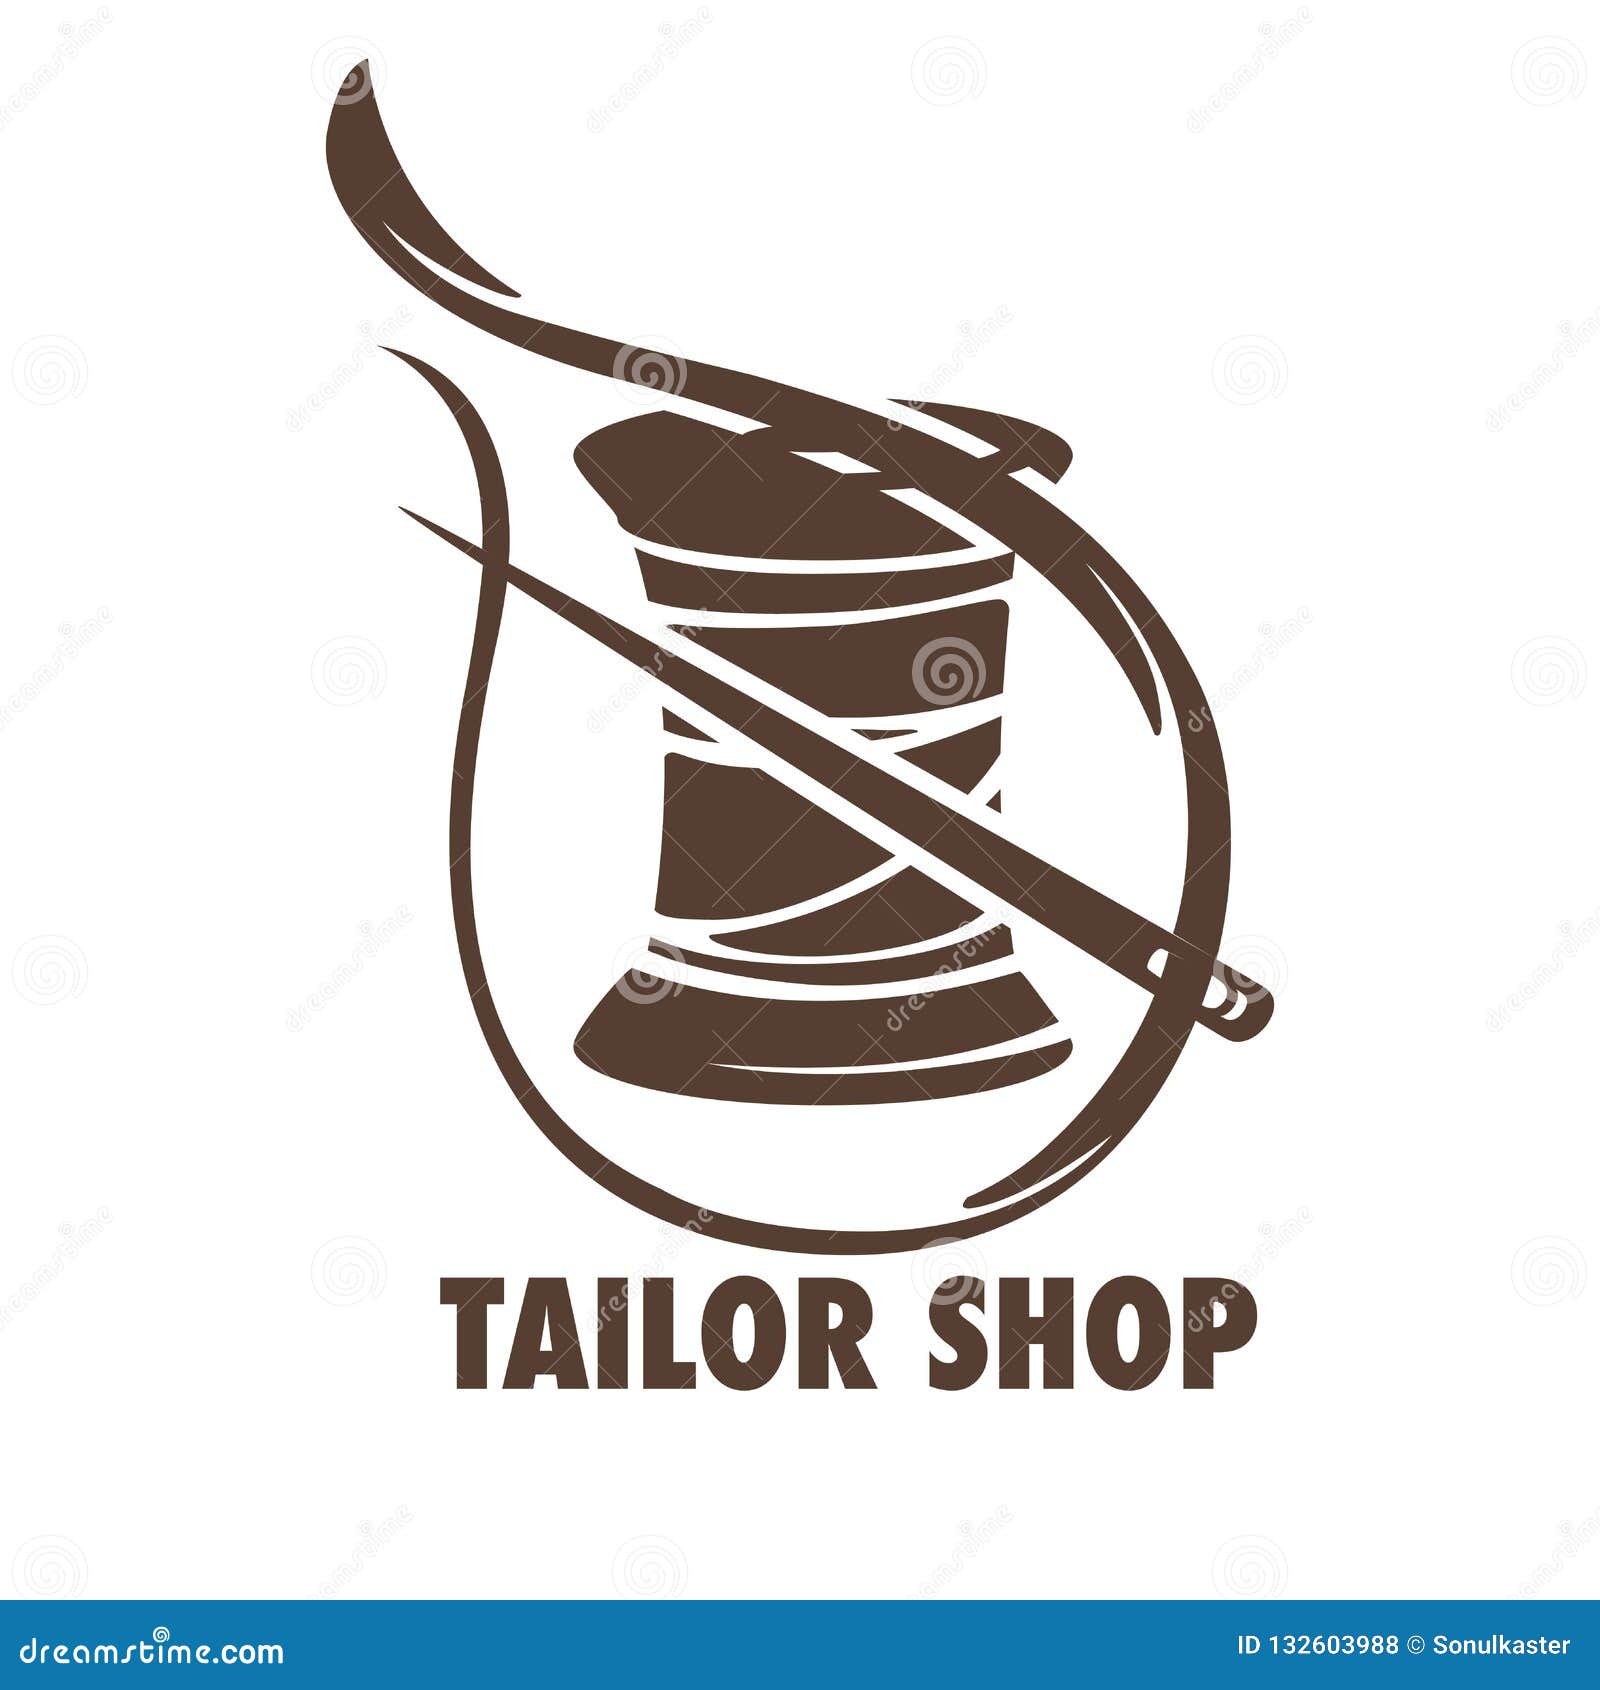 Tailor Shop Sketch With A Needle And Bobbin Of Thread Stock Vector